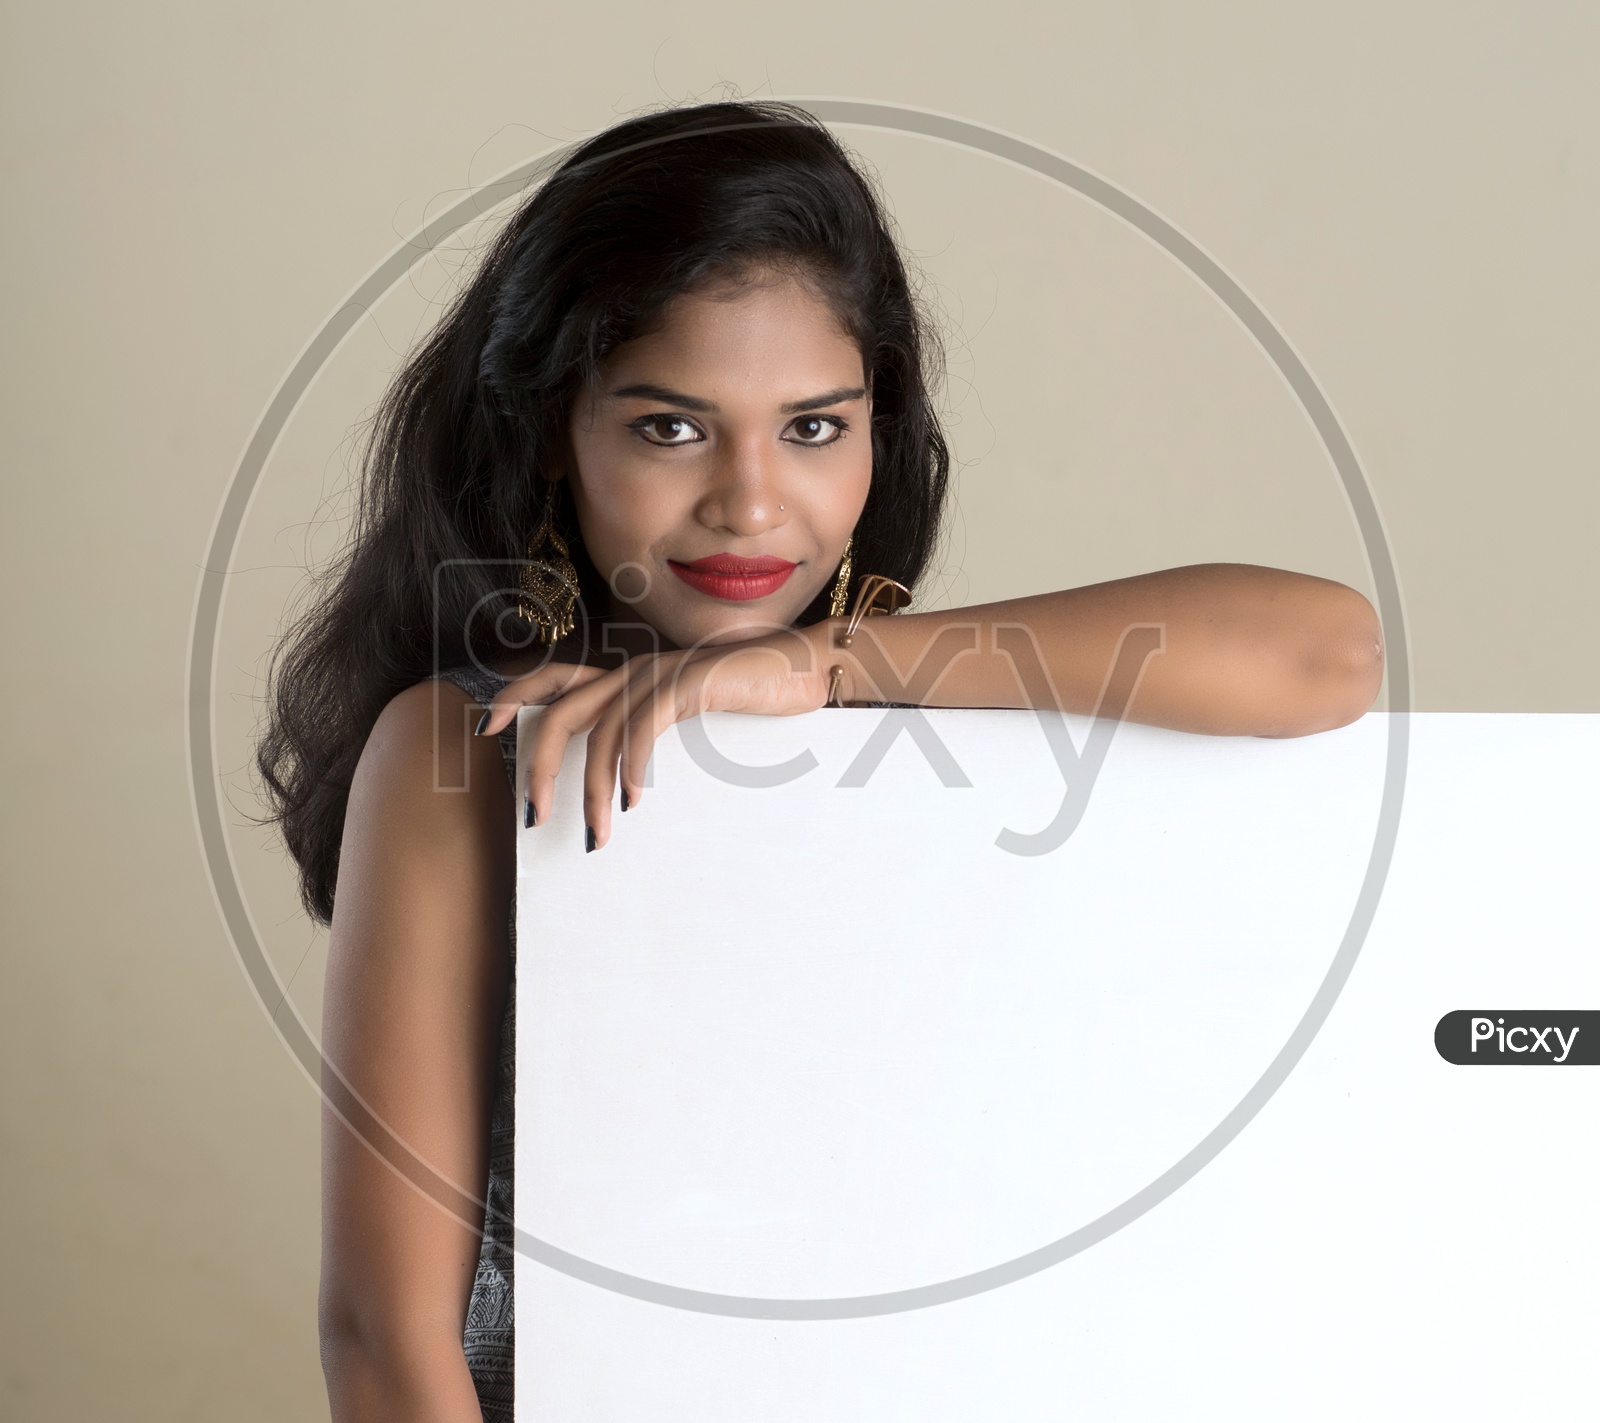 Pretty young Girl Showing Empty Placard With Space and With Expression On Face on an Isolated White Background